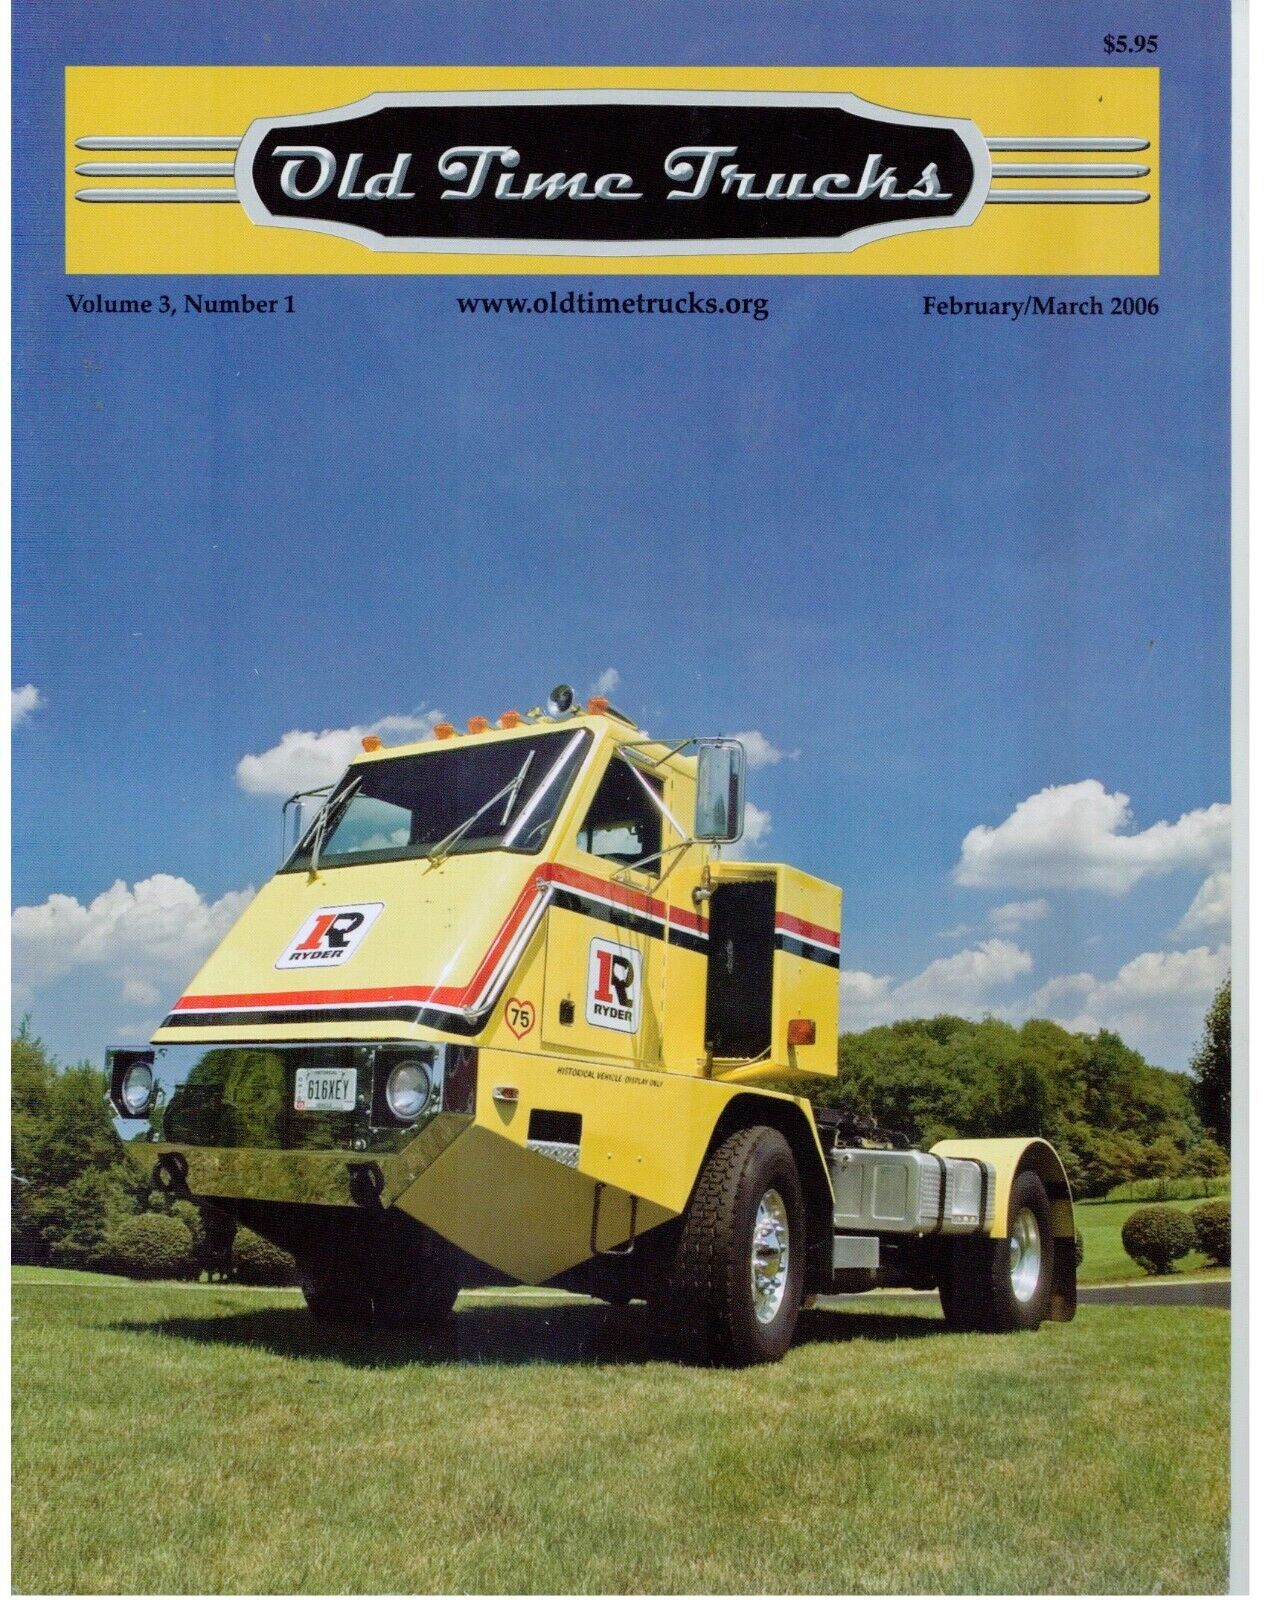 Walter Truck History, Dick Best Antique Truck Collection, Iowa 80 Hall of Fame